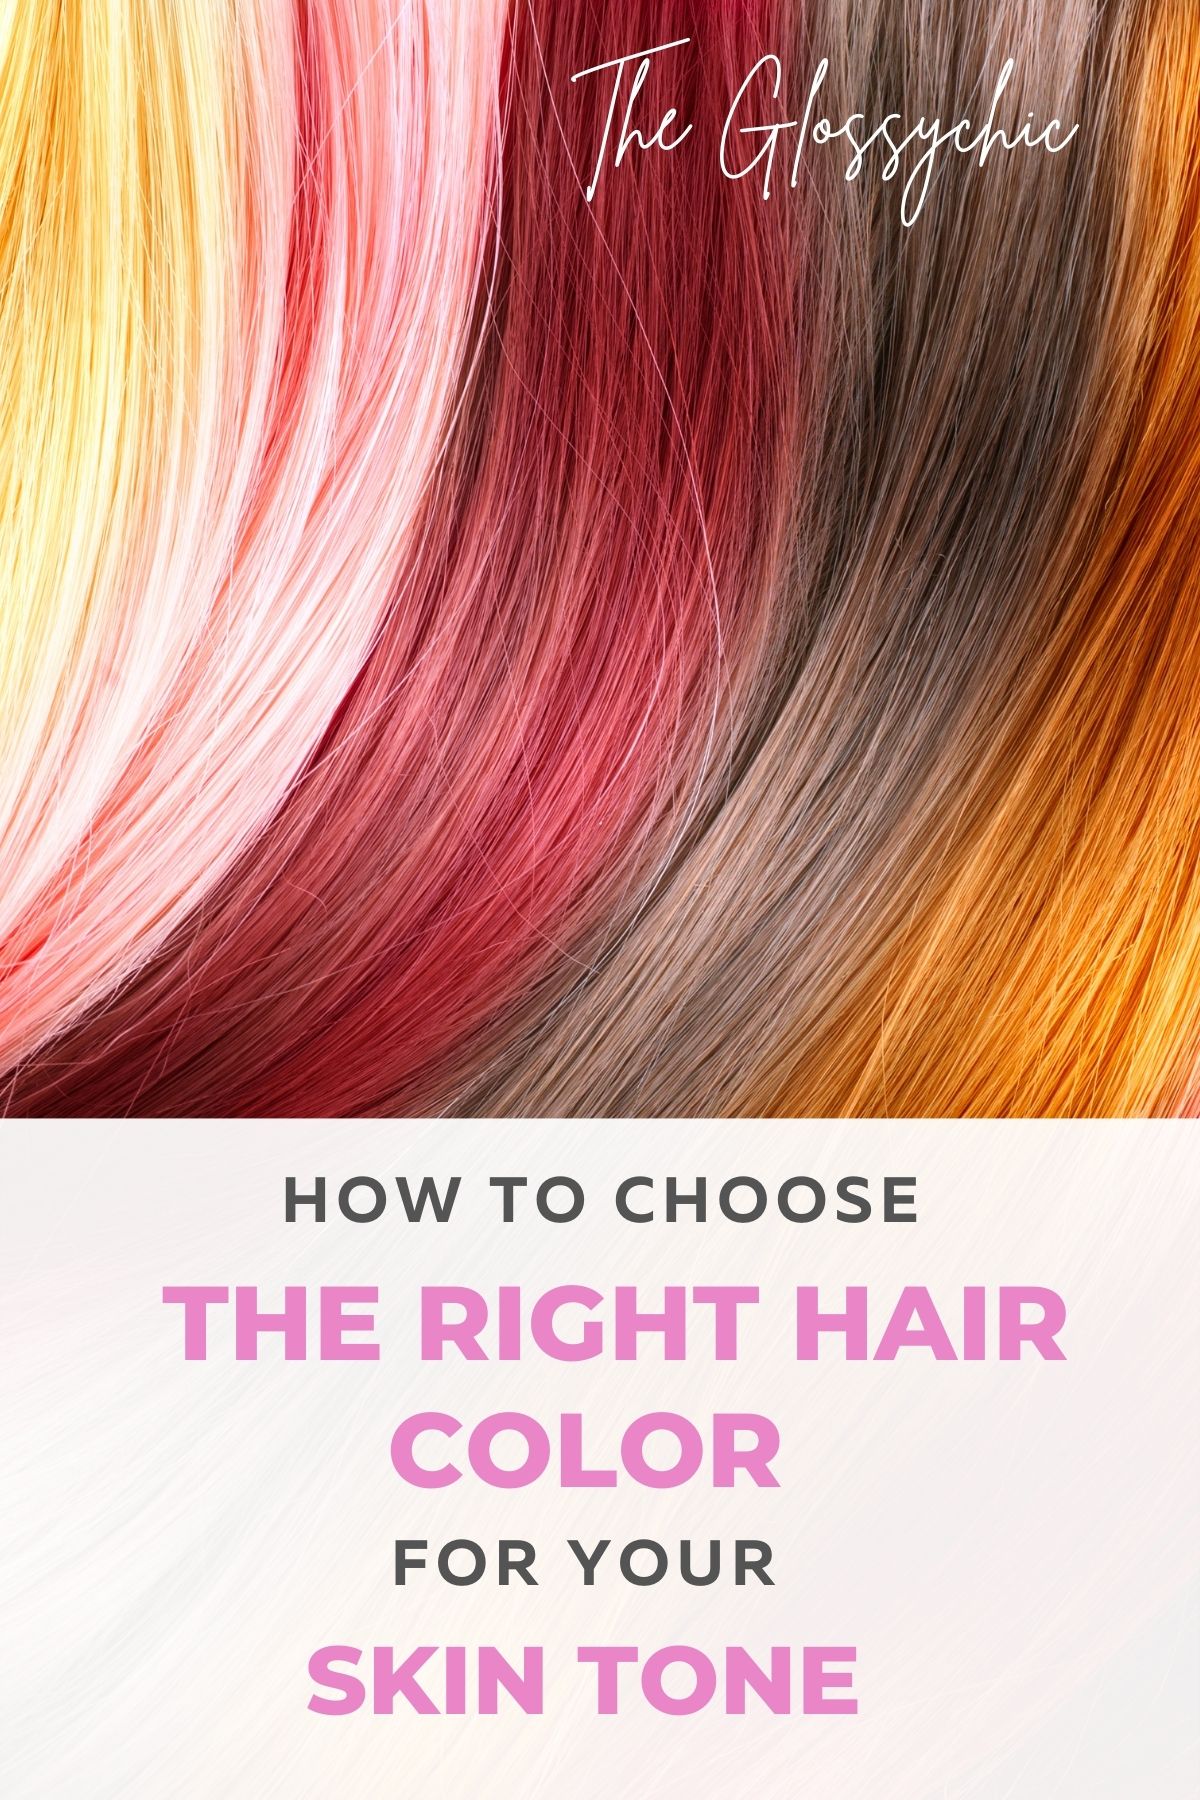 How To Choose The Right Hair Color For Your Skin Tone - The Glossychic